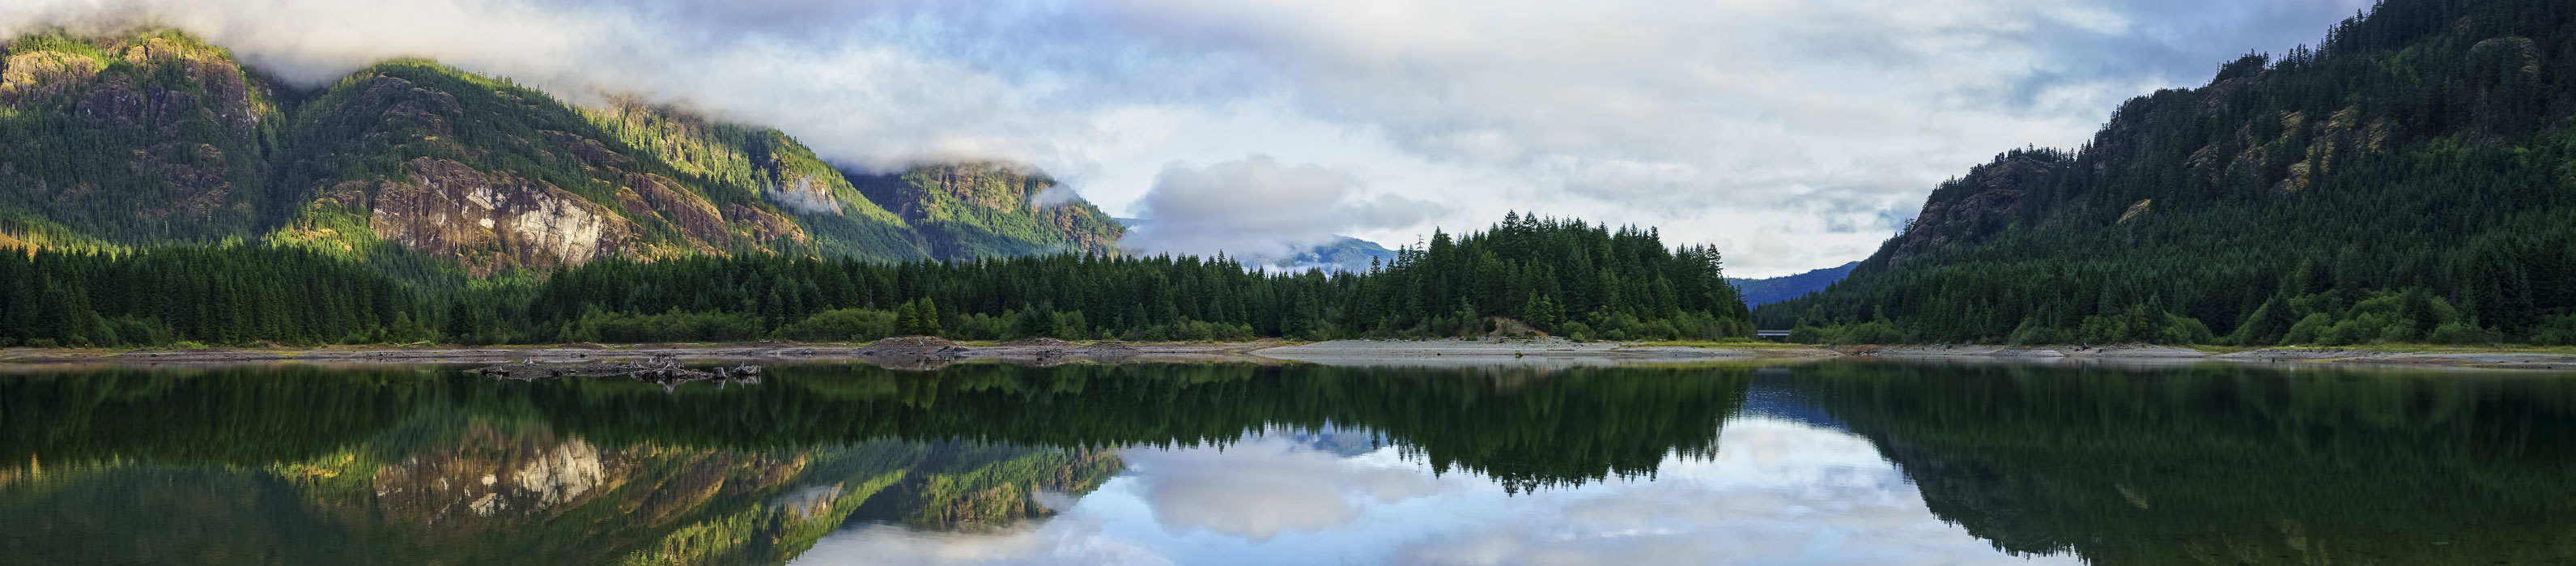 Reflective water with green mountains